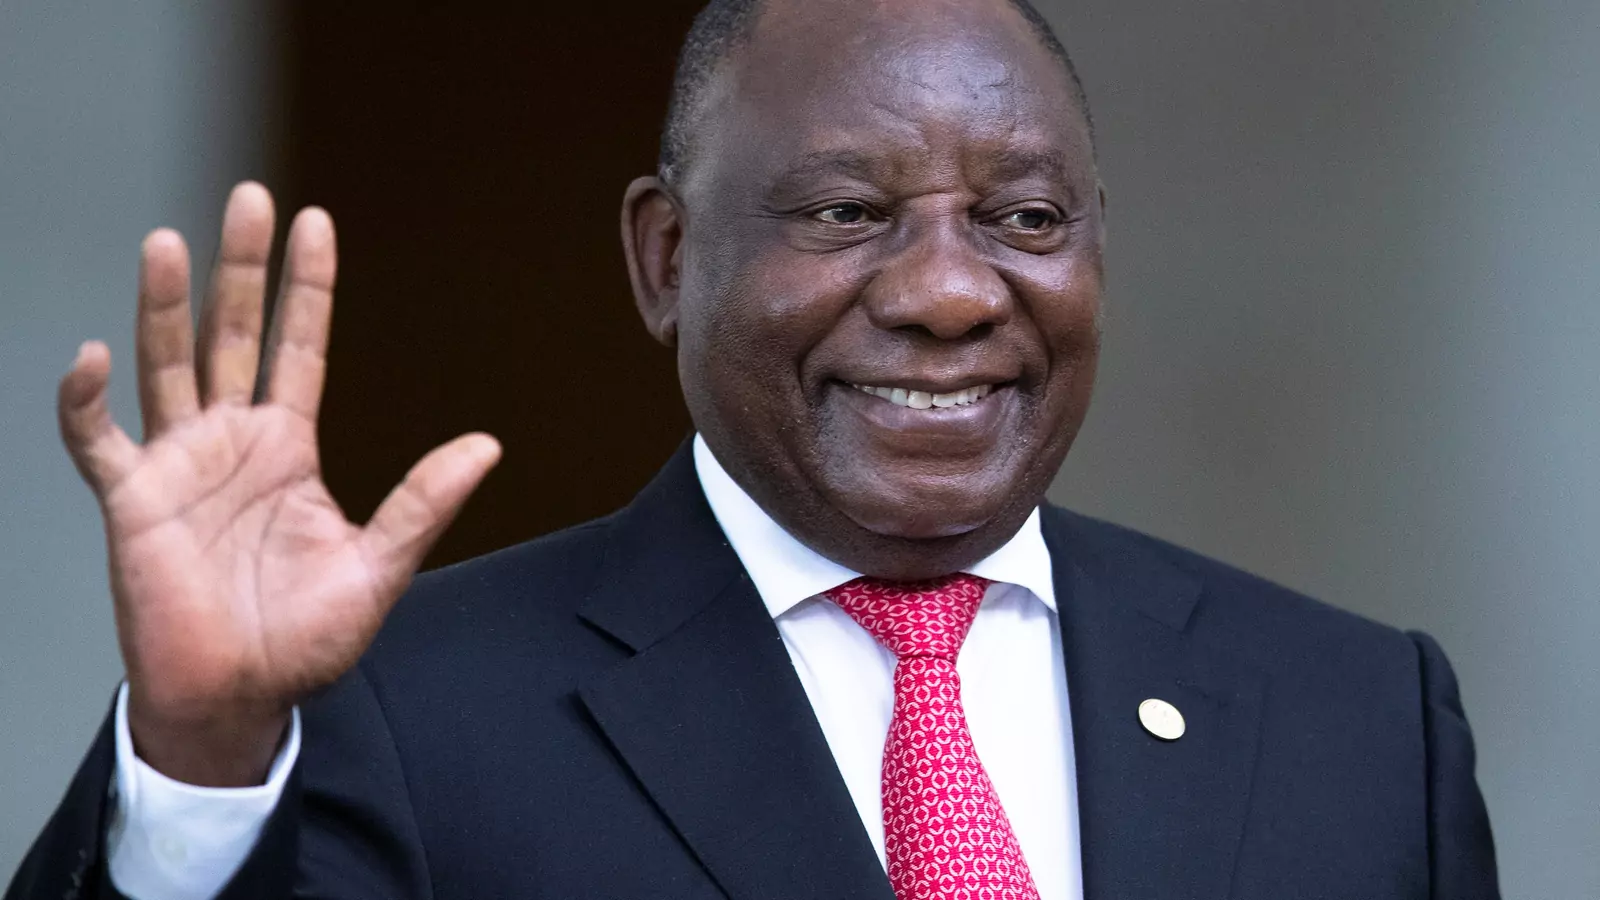 South Africa's Ramaphosa Tackles Corruption and Strengthens His Hand | Council on Foreign Relations